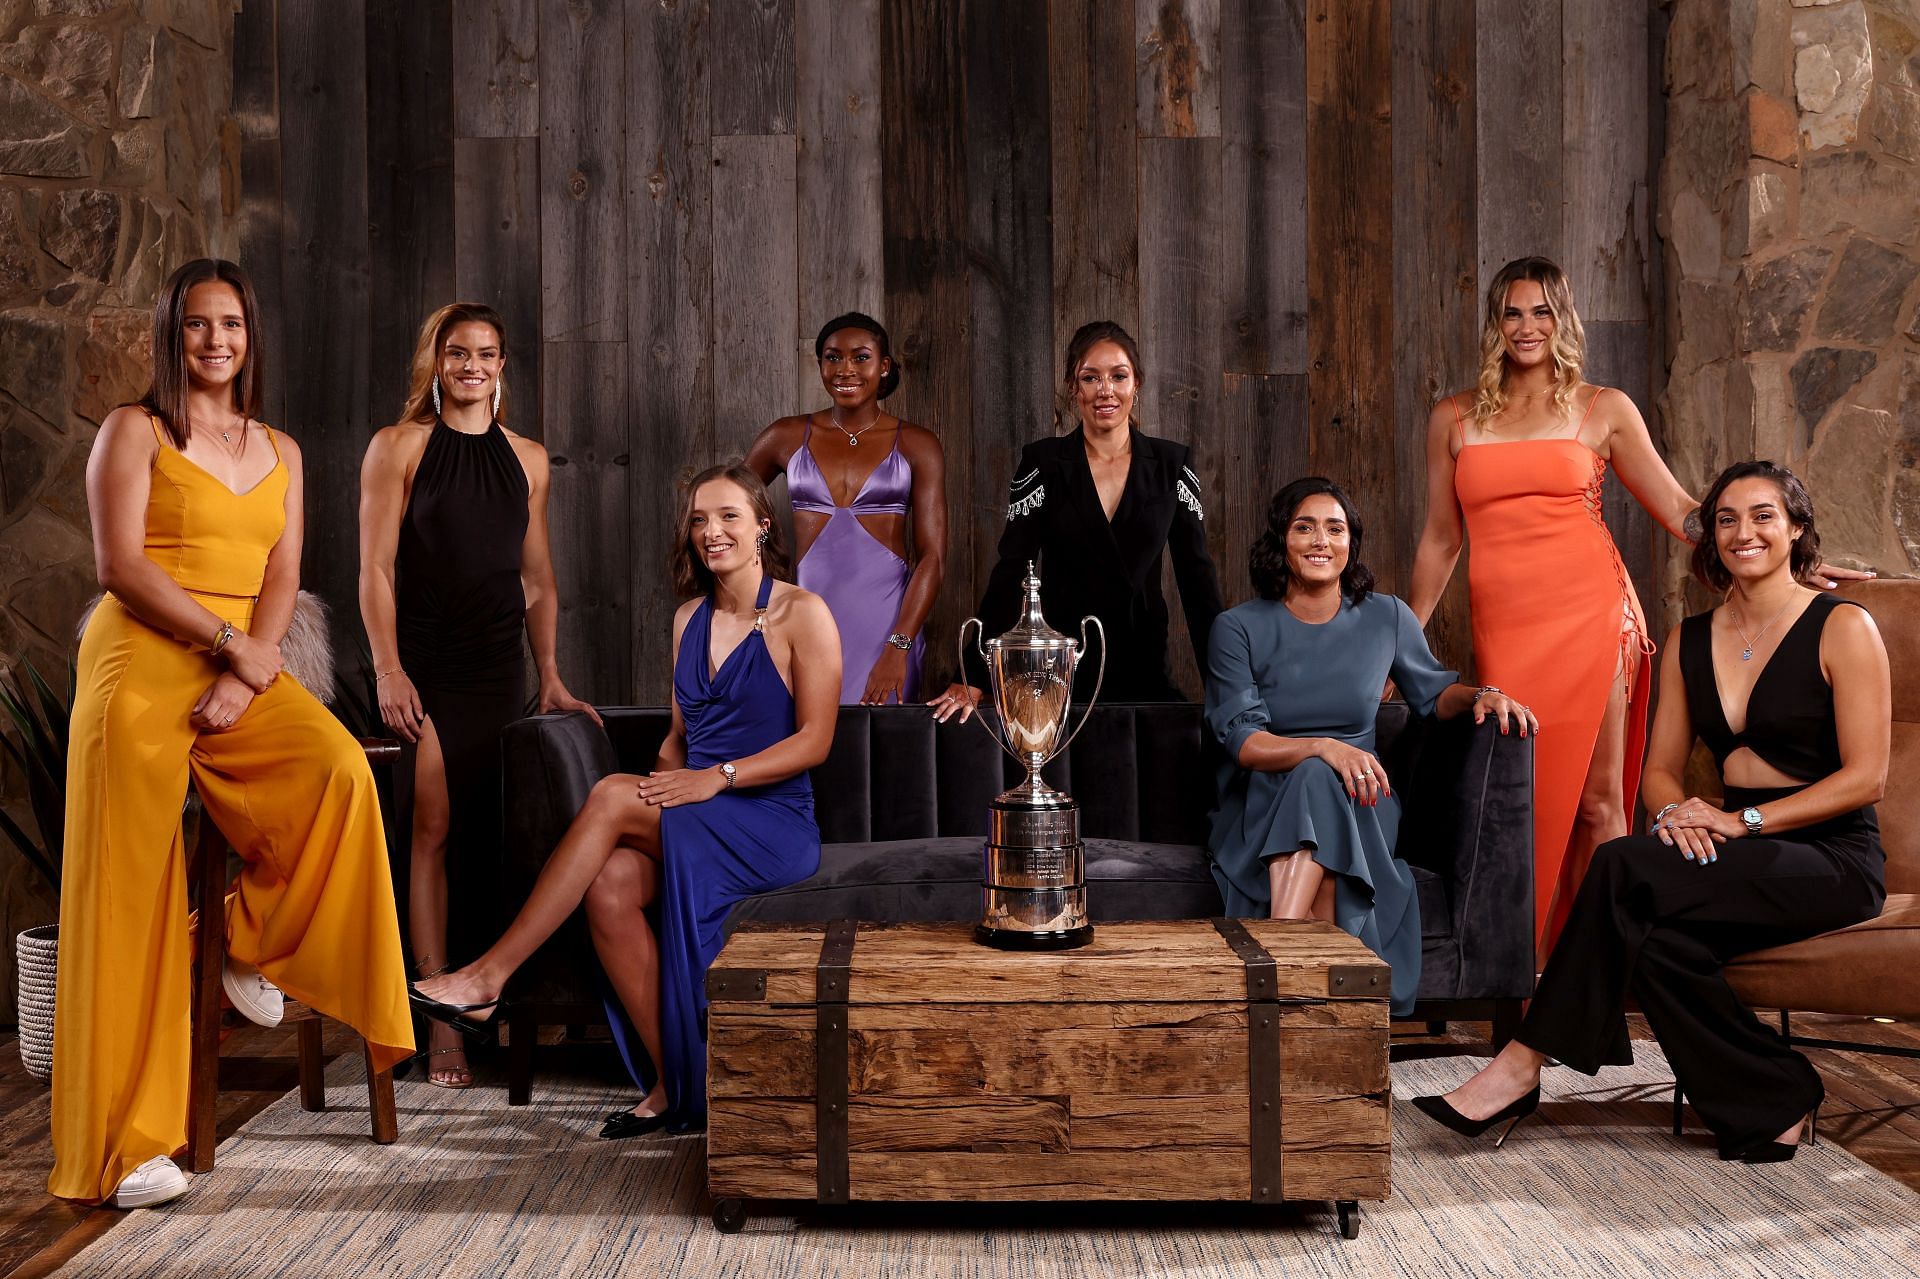 Players contesting the singles title at the 2022 WTA Finals